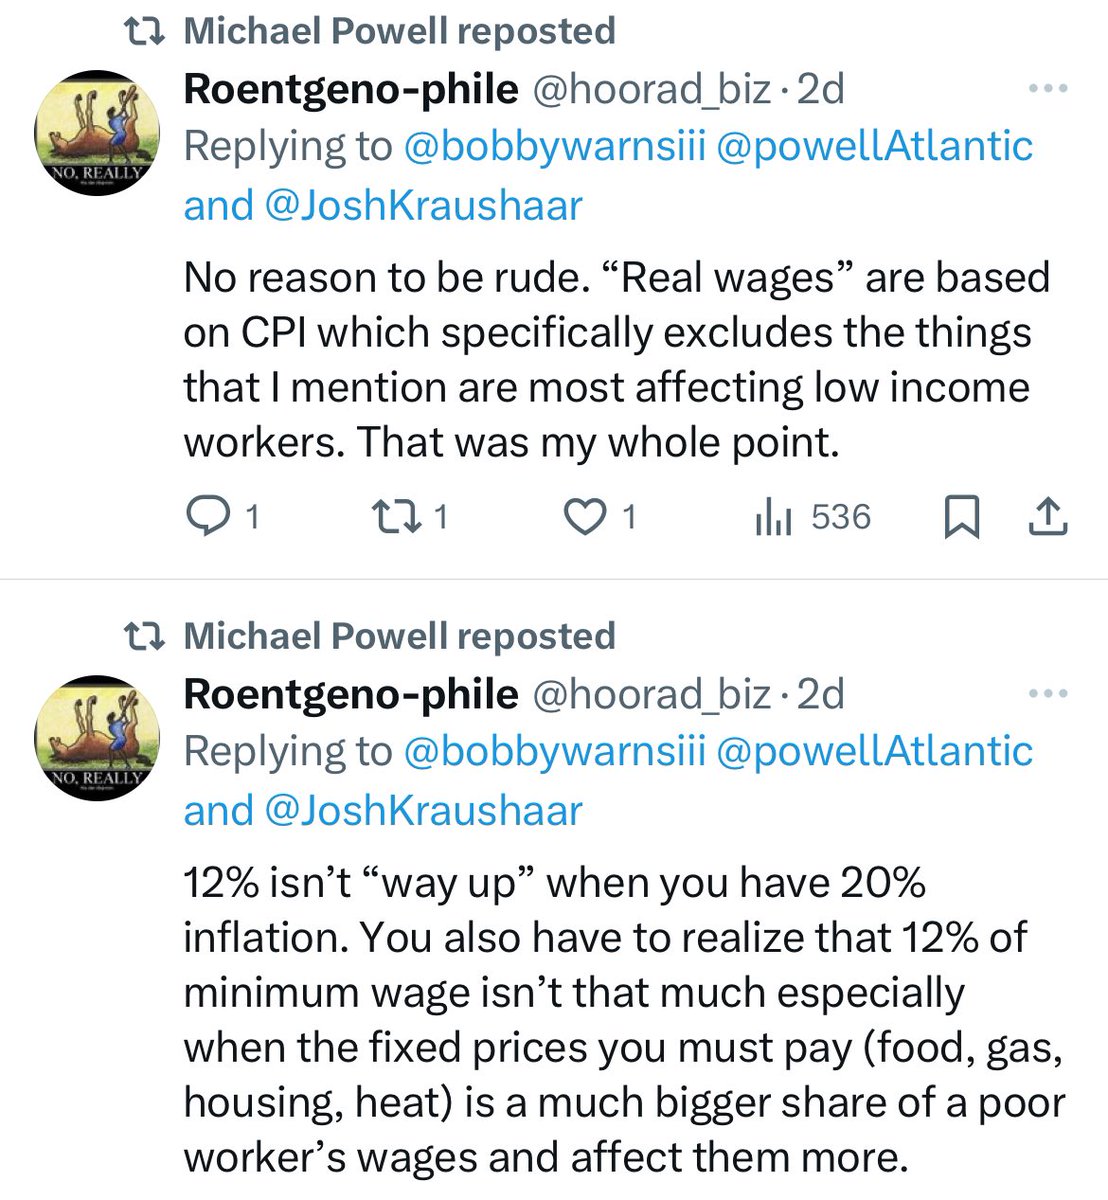 Love it when journalists RT misinformation like “CPI doesn’t include shelter, energy, and food costs.”